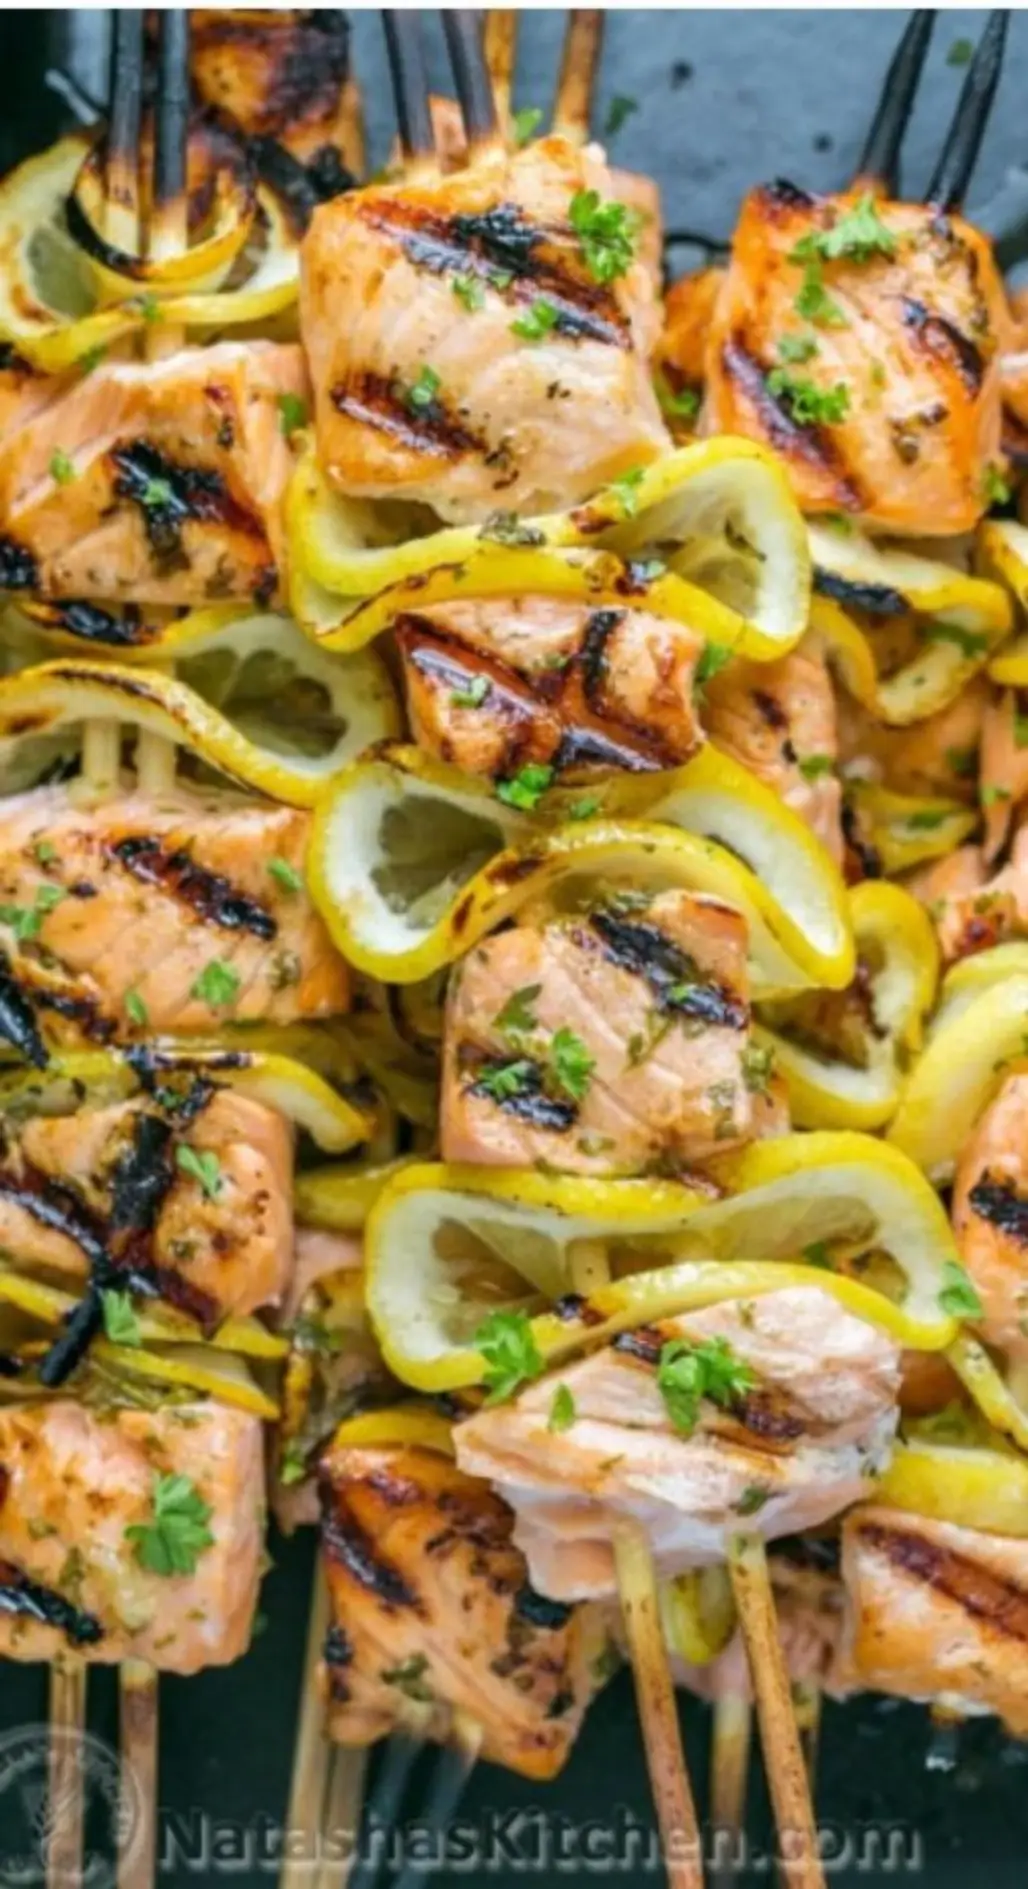 Easy Grilled Salmon Skewers with Garlic & Dijon